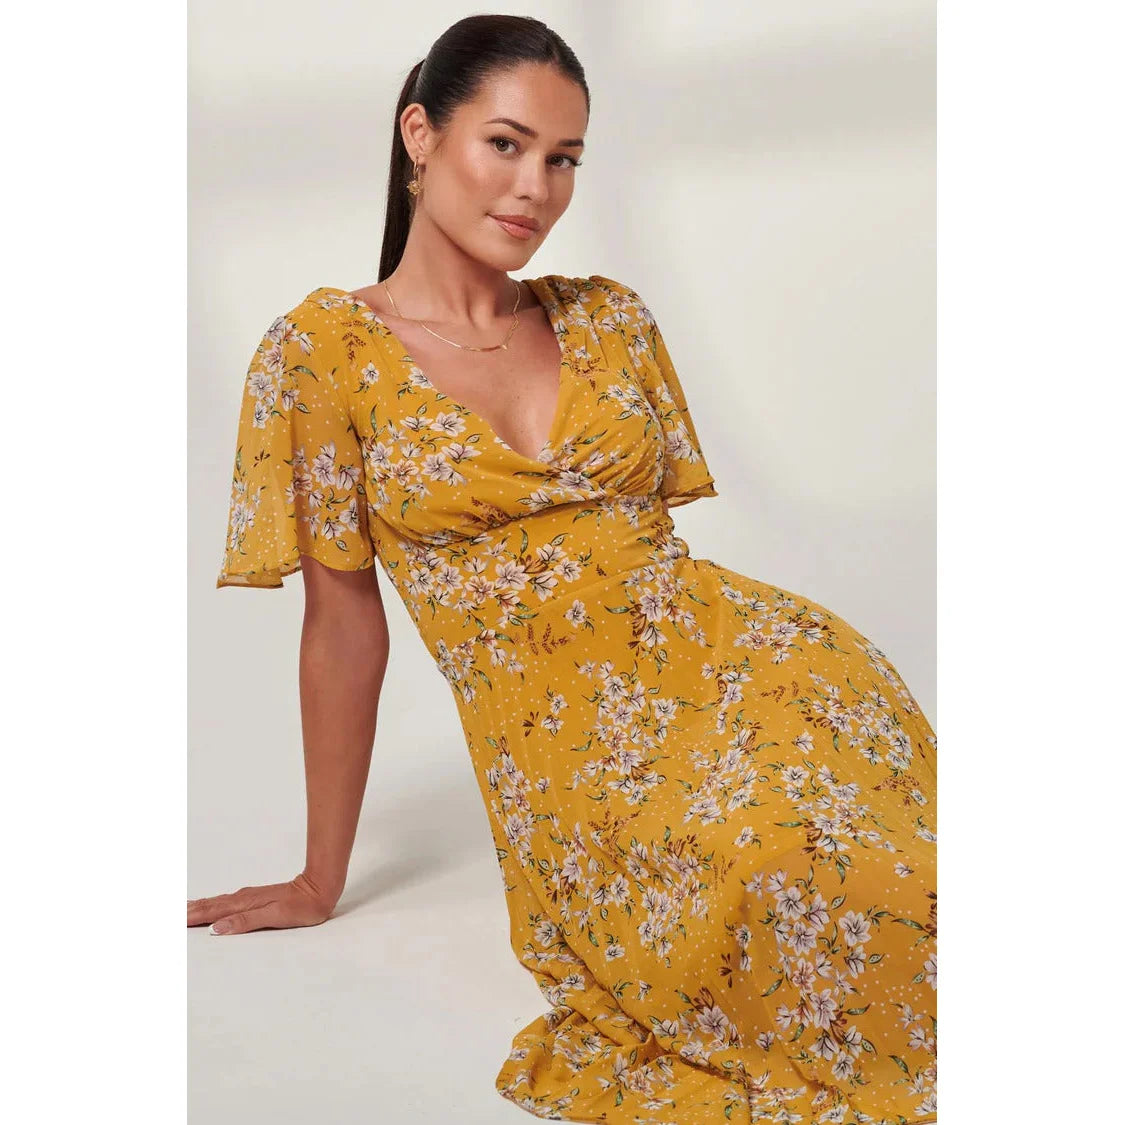 Jolie Moi Mustard Yellow Floral Print Pleated Dress With Angel Sleeves